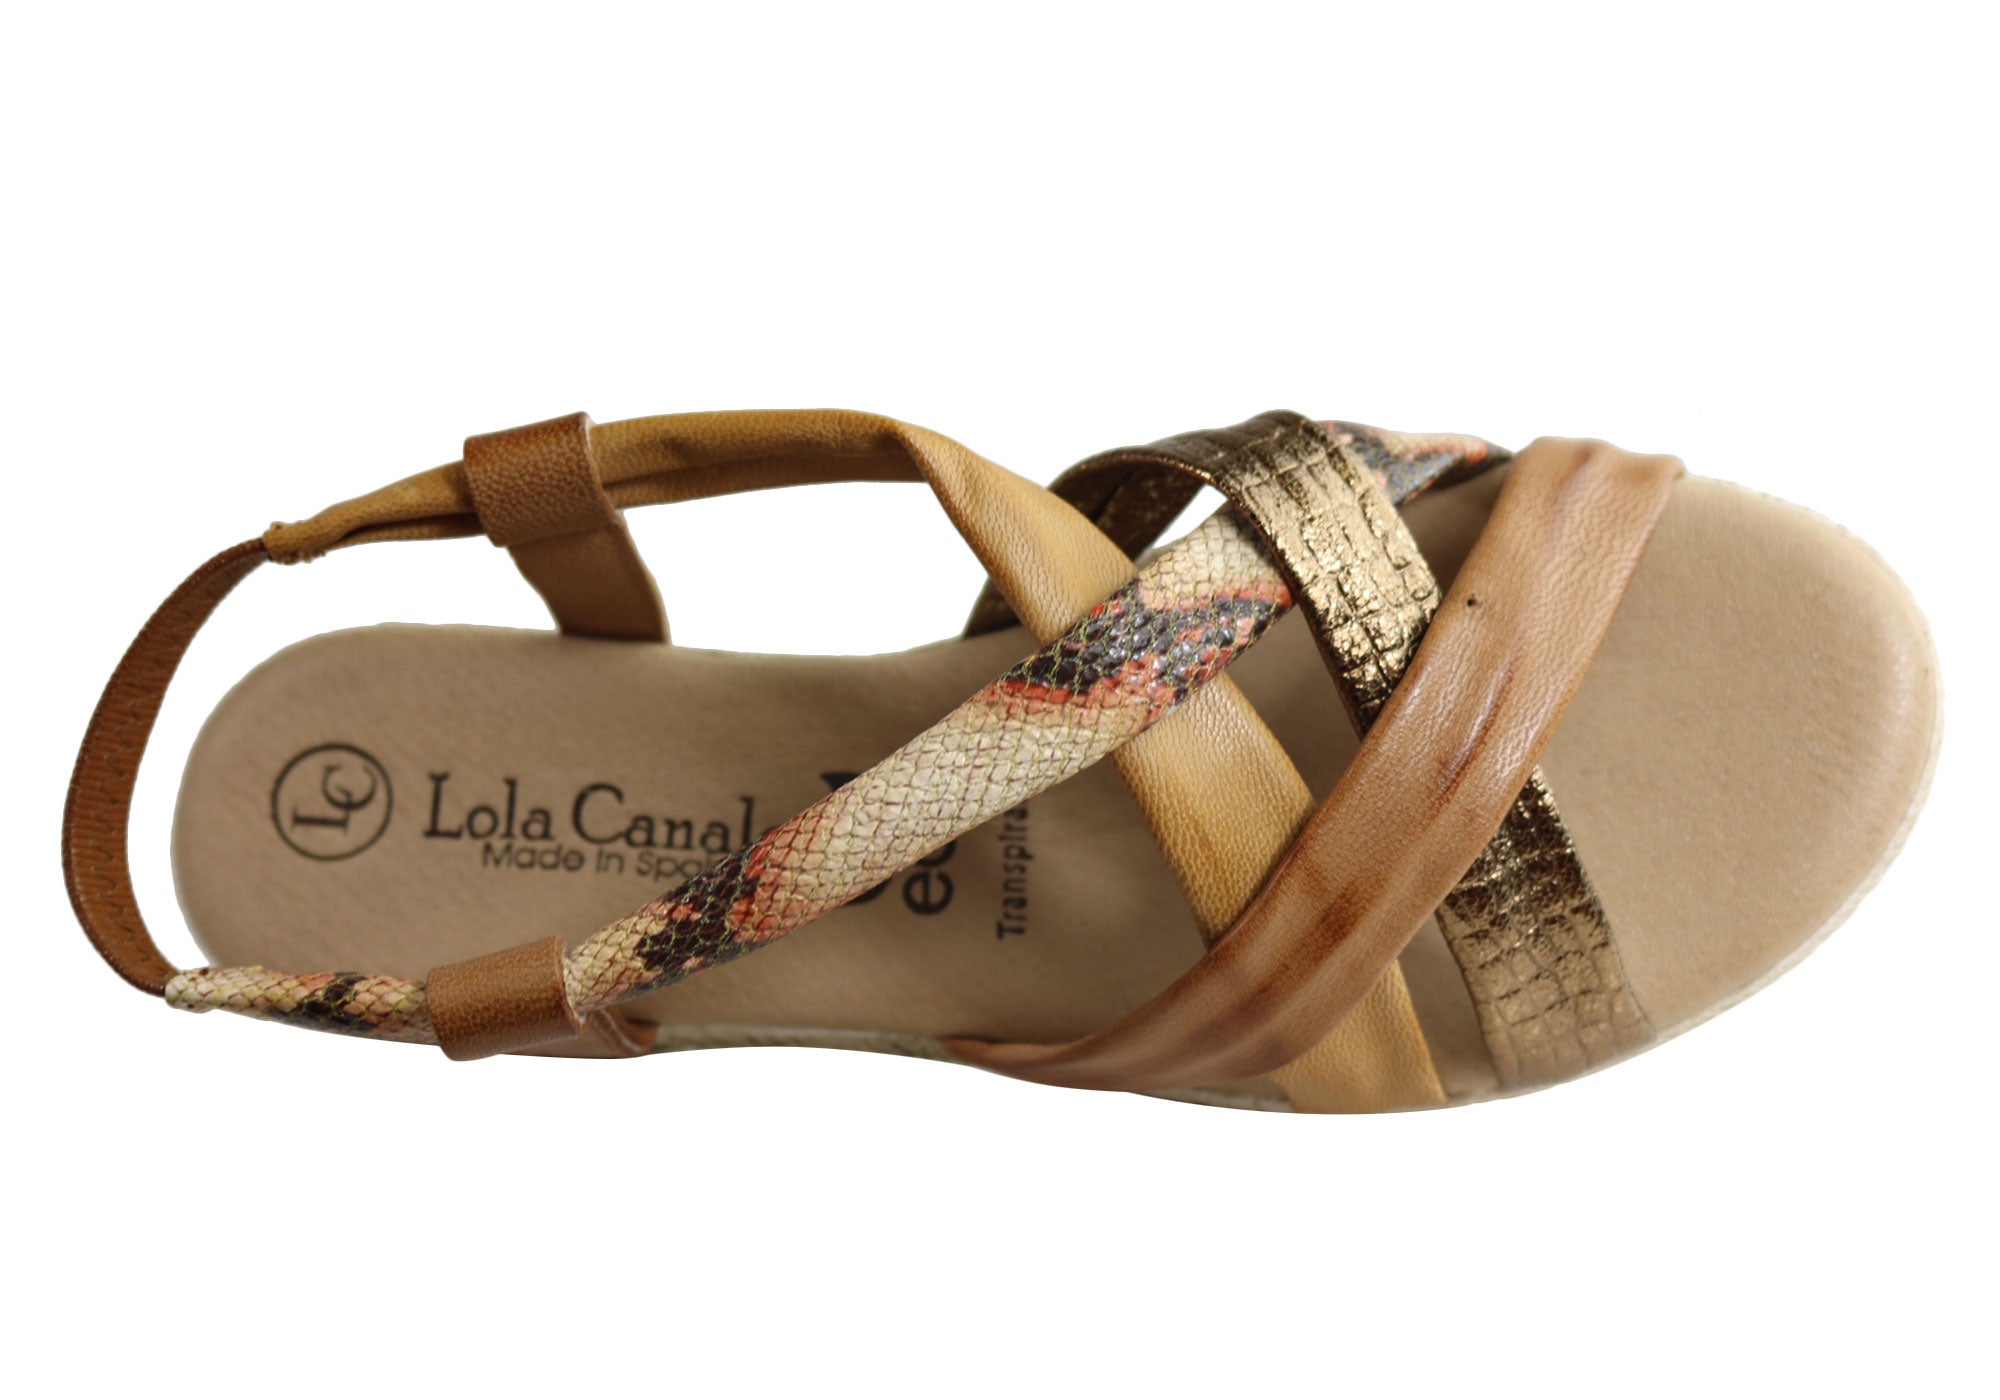 Lola Canales Yasmine Womens Comfortable Leather Sandals Made In Spain